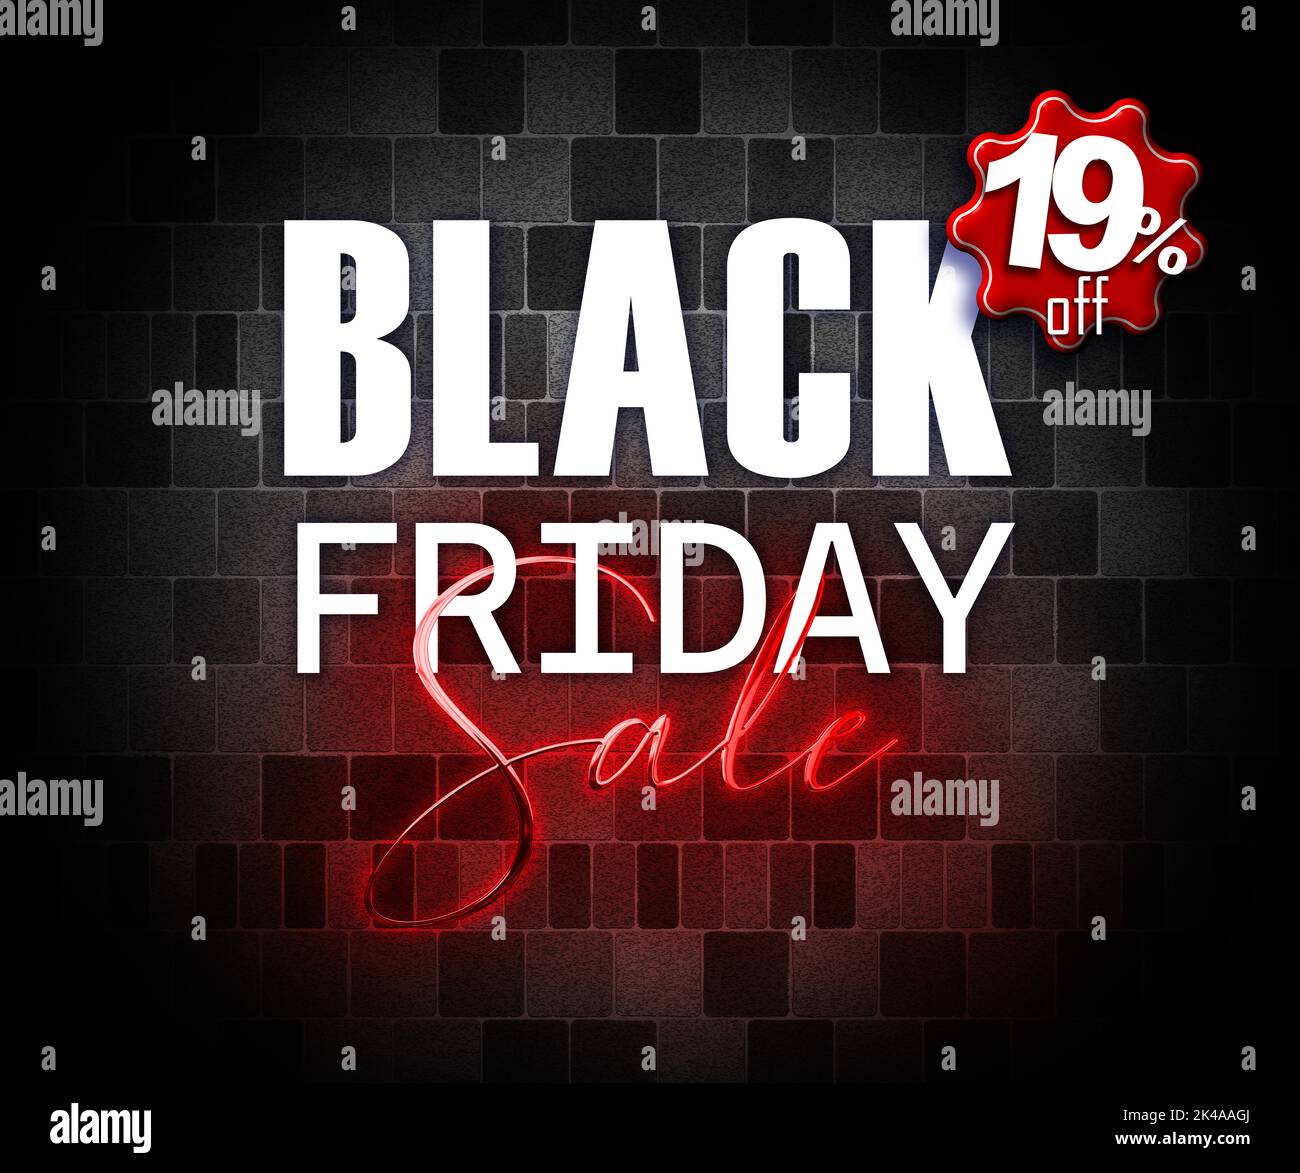 illustration with 3d elements black friday promotion banner 19 percent off sales increase Stock Photo